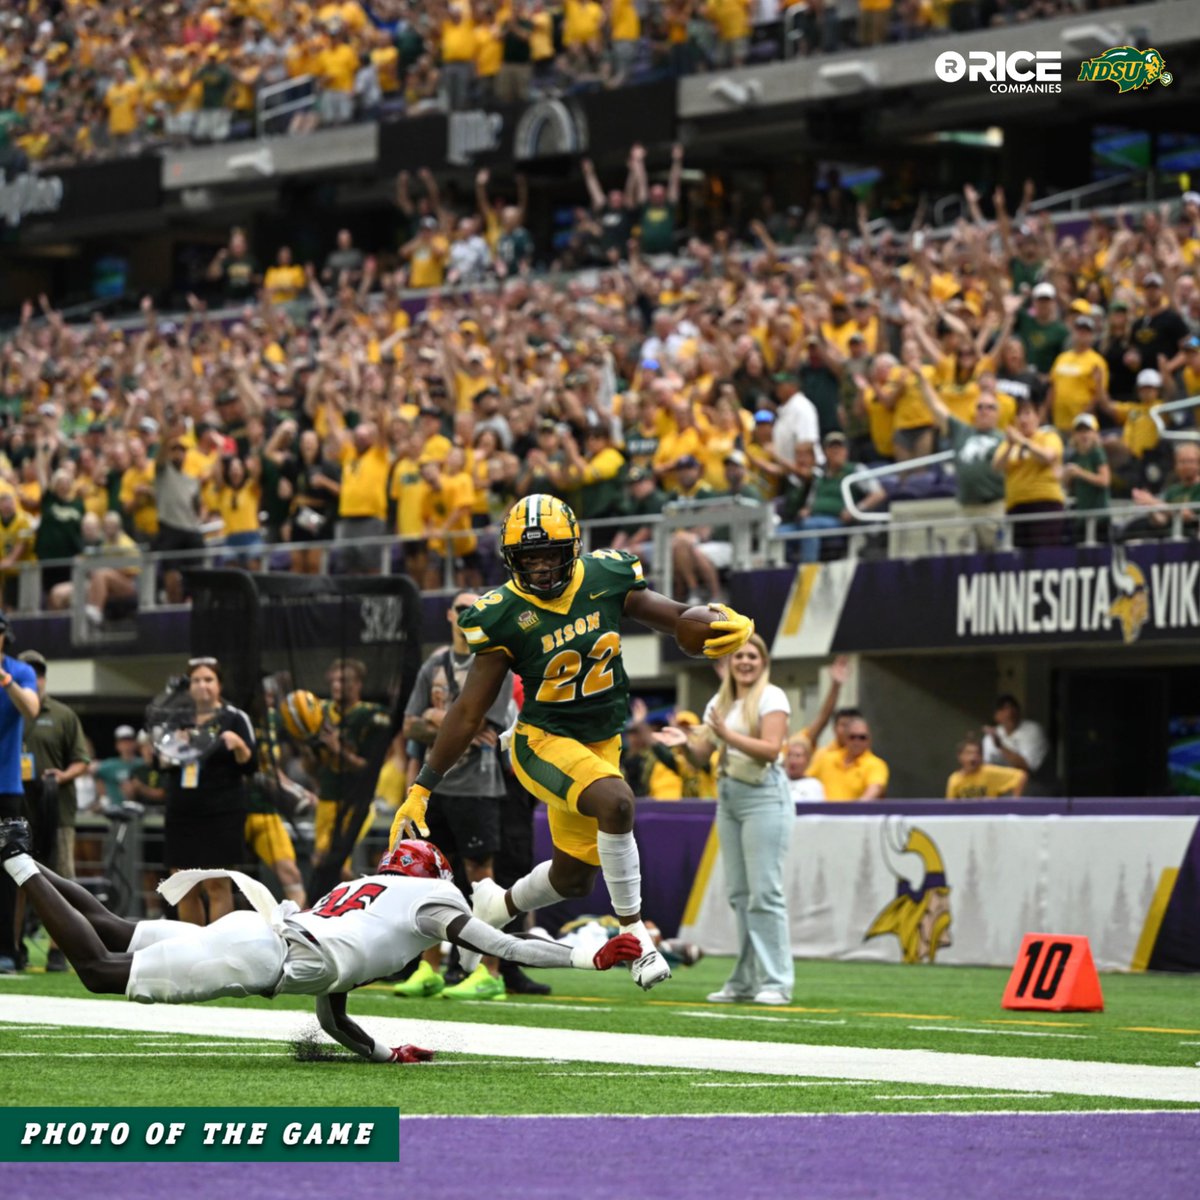 TaMerik Williams finishing a 54-yard touchdown run is this week's Photo of the Game presented by Rice Companies.